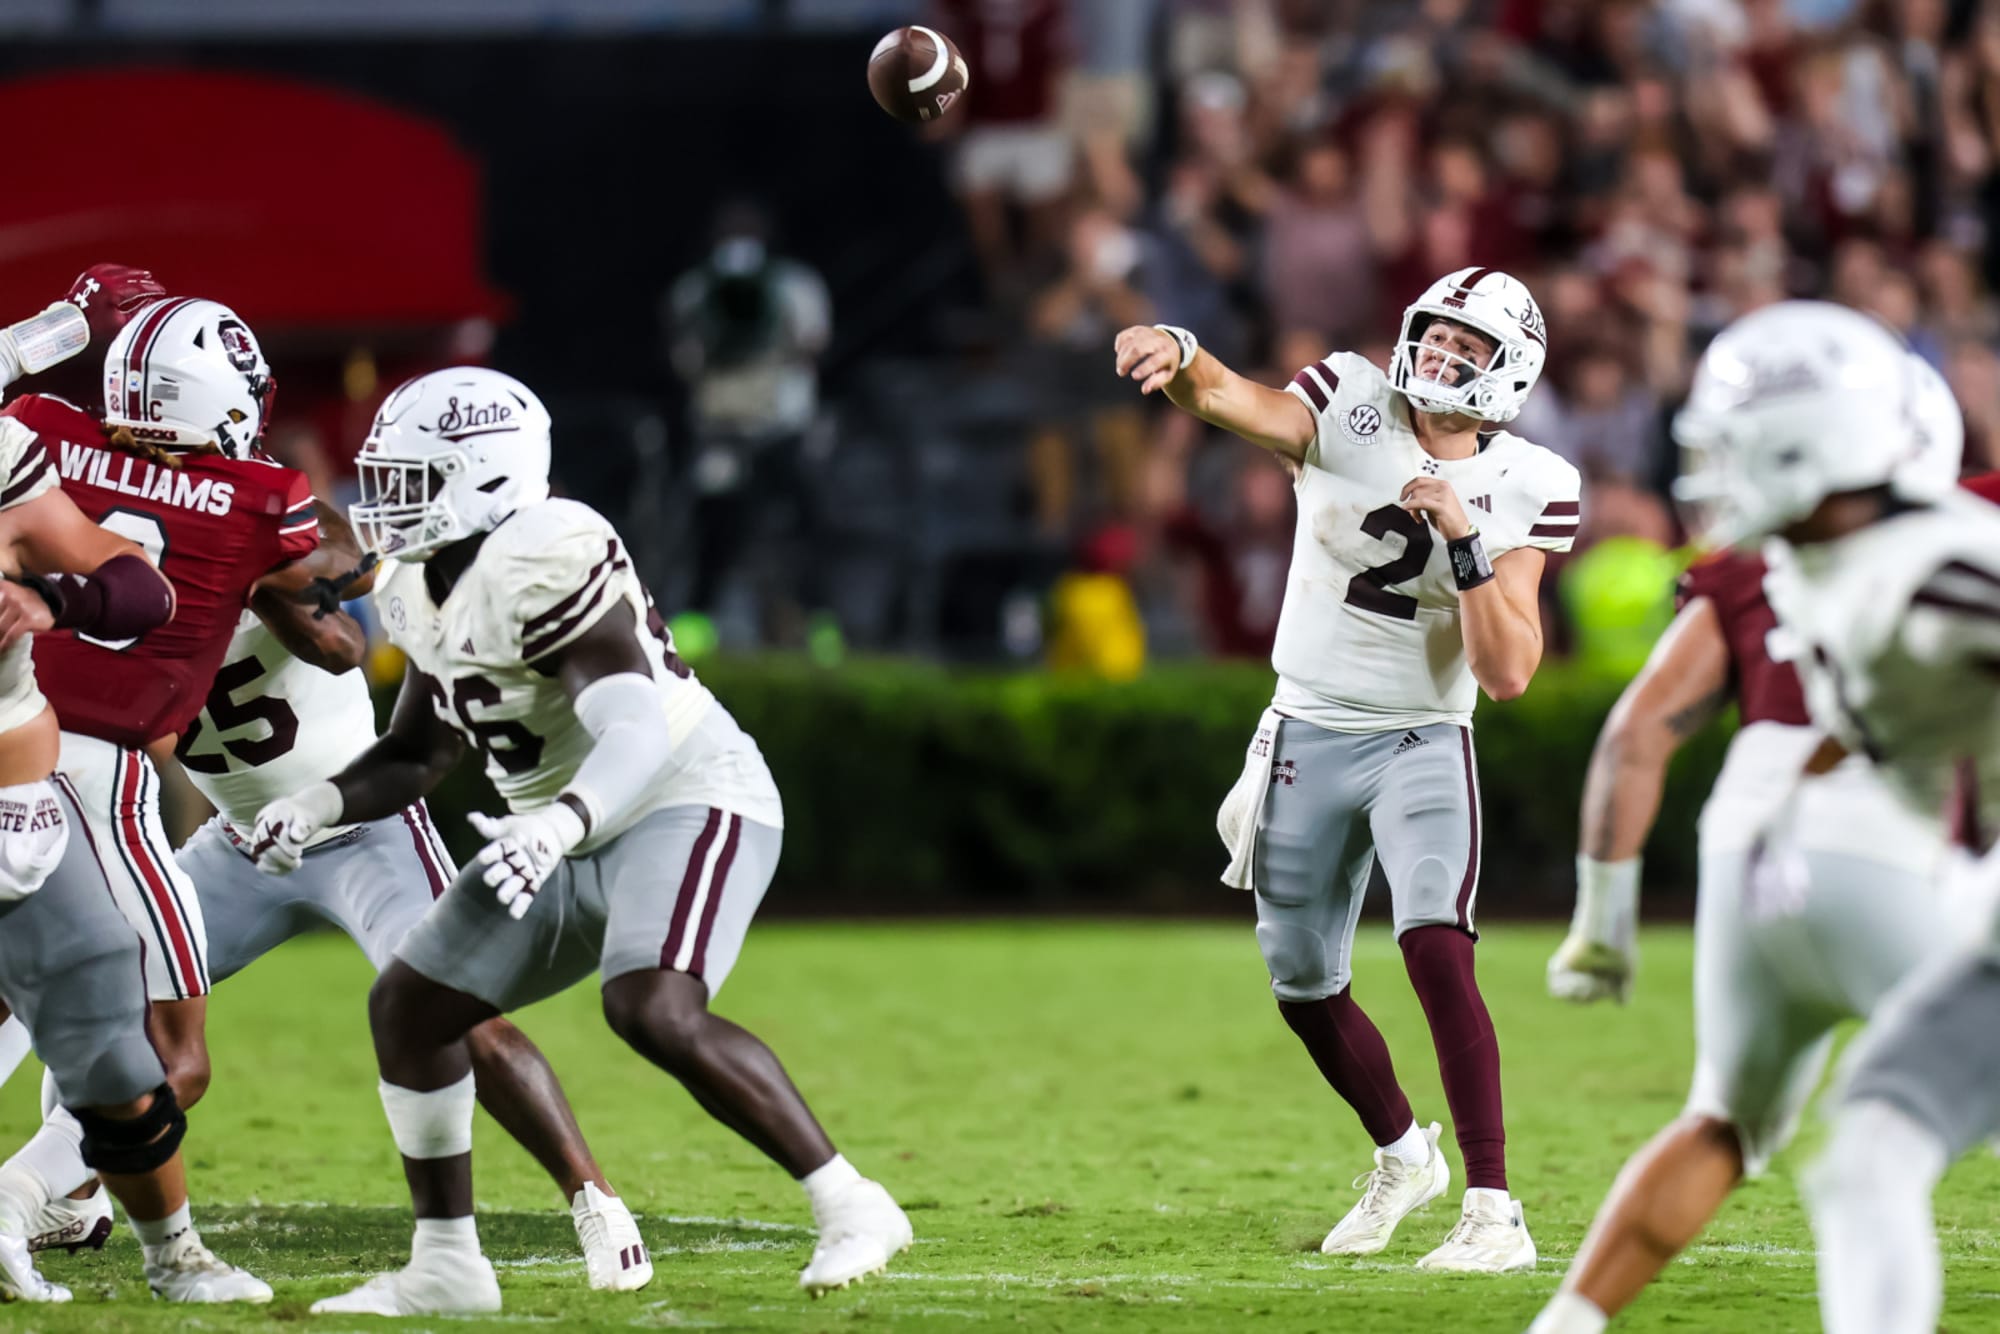 How to watch Mississippi State vs. Alabama: TV channel, live stream, stats